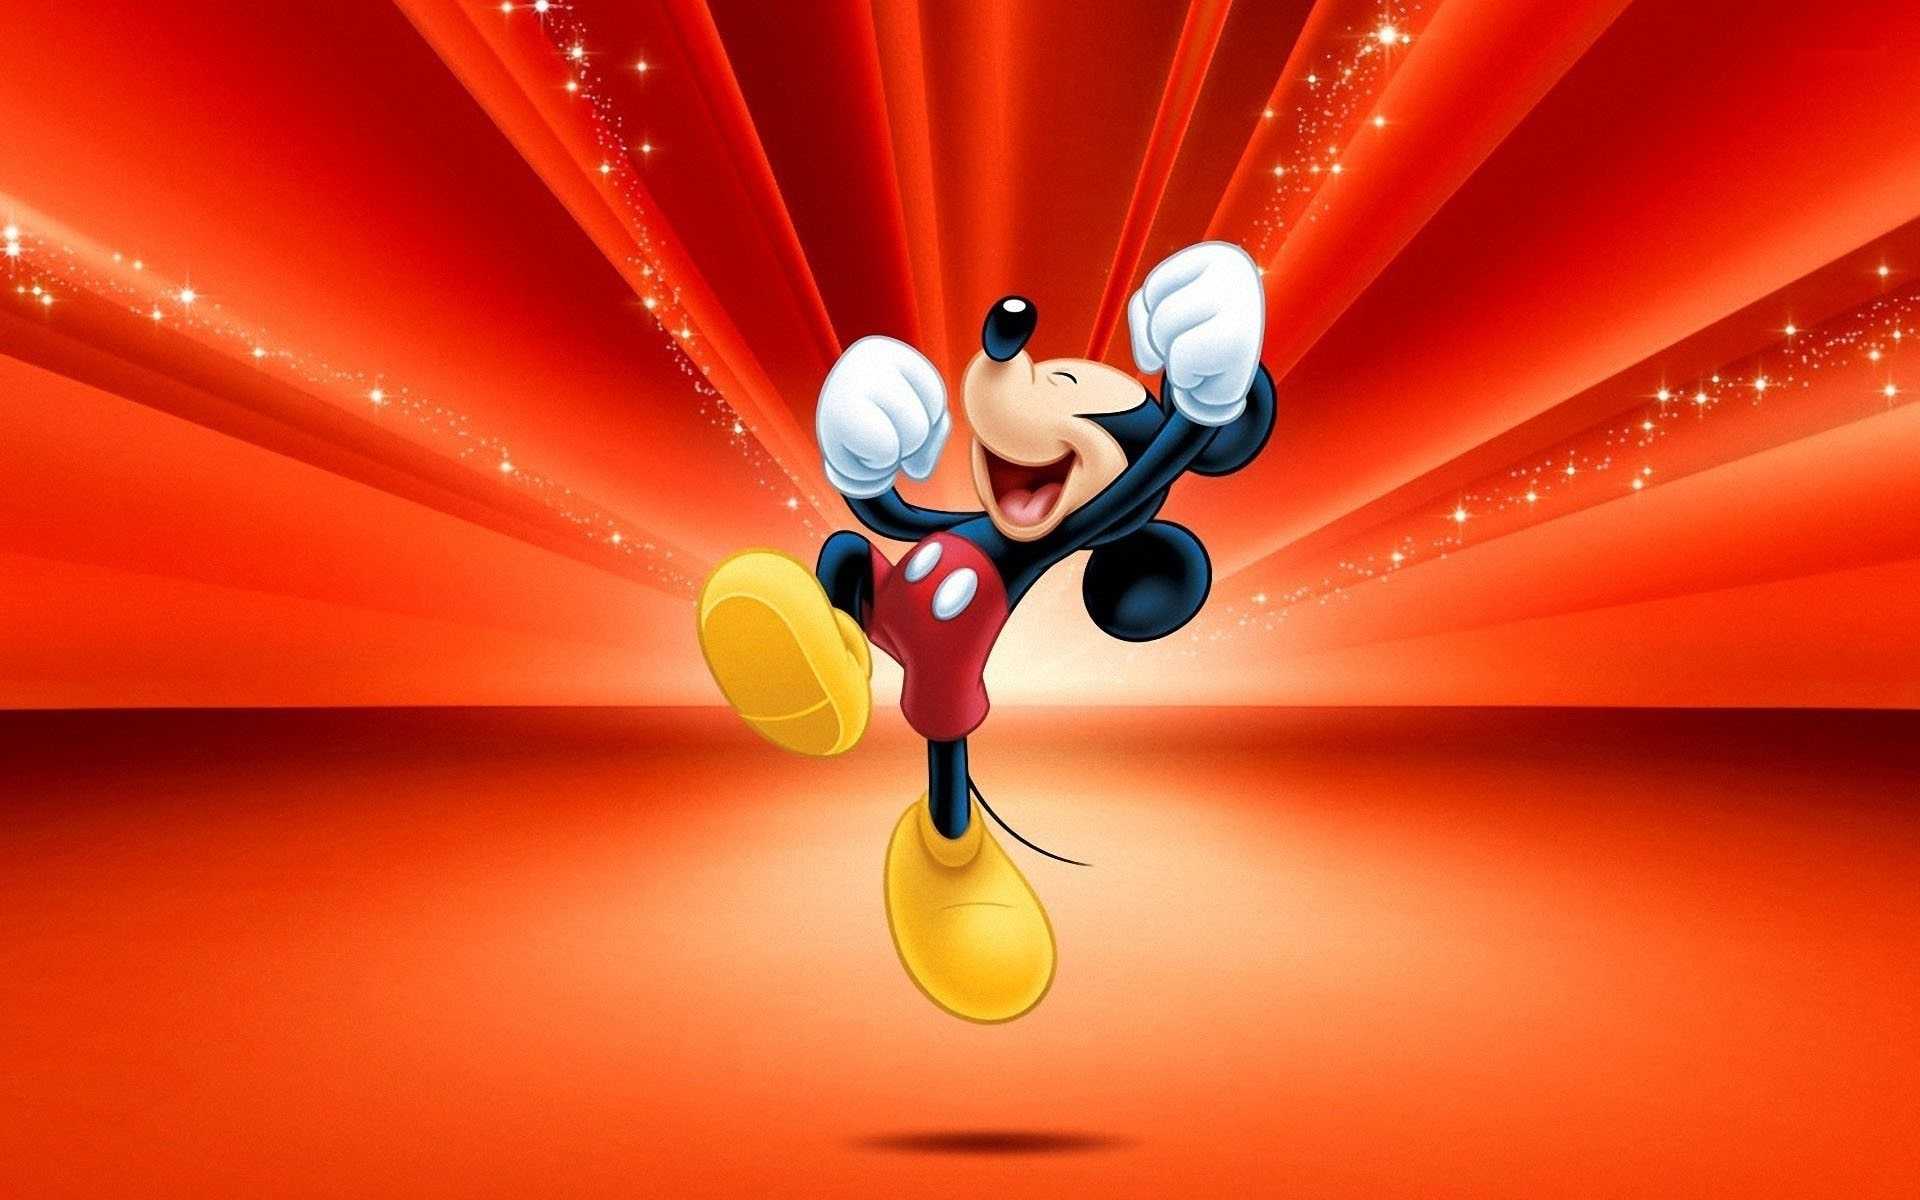 Mickey Mouse Wallpaper - NawPic